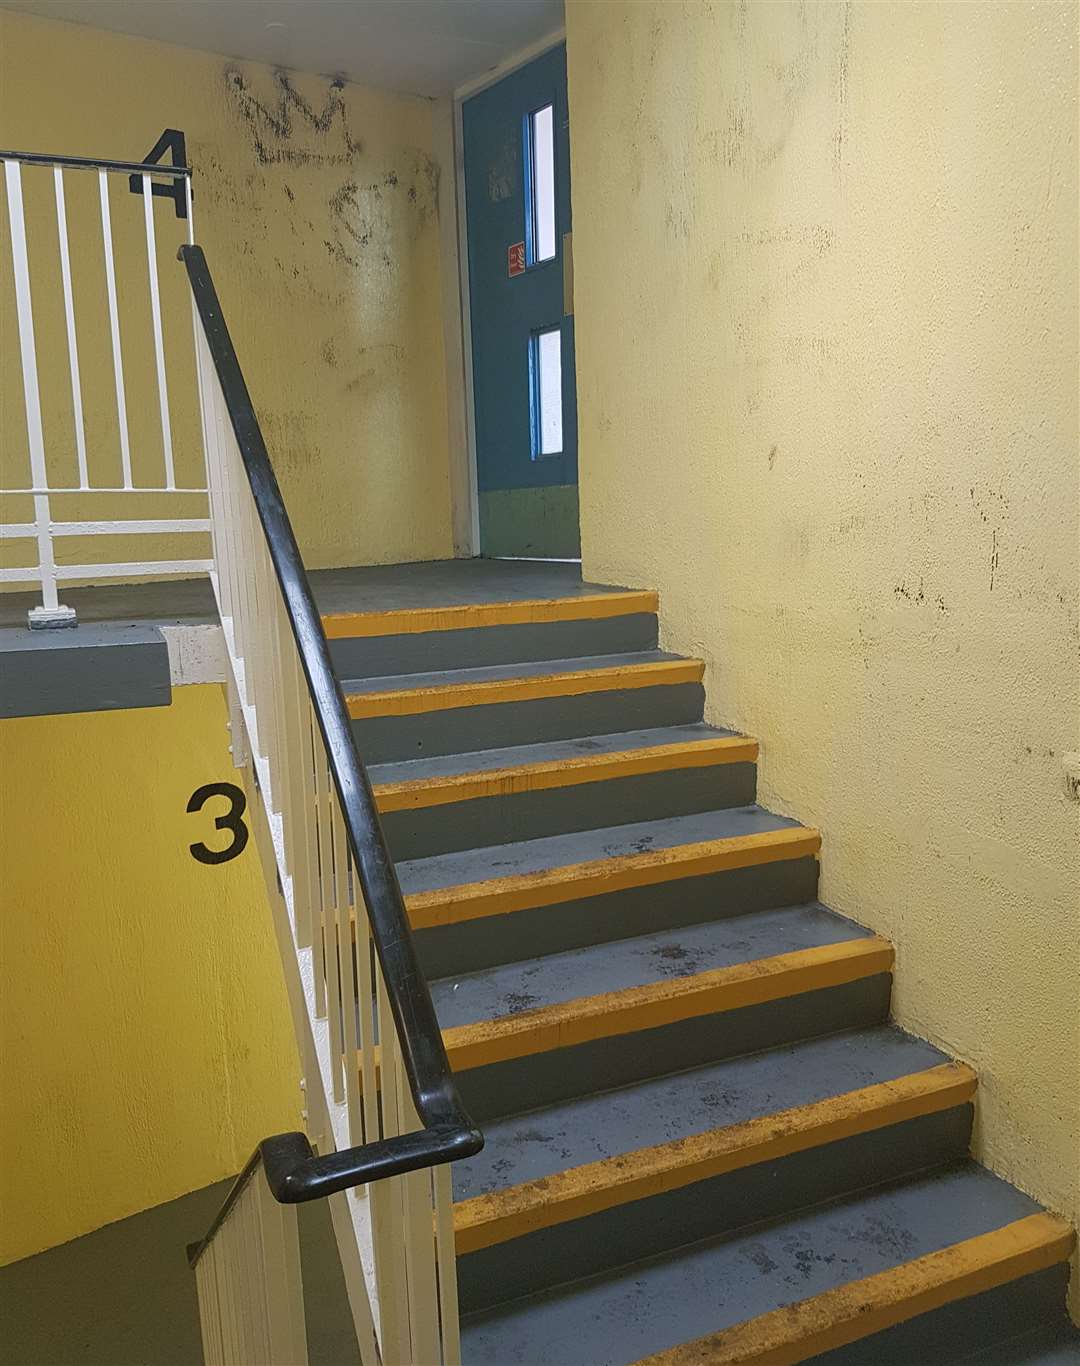 The stairwell has previously been described as a "drugs den"